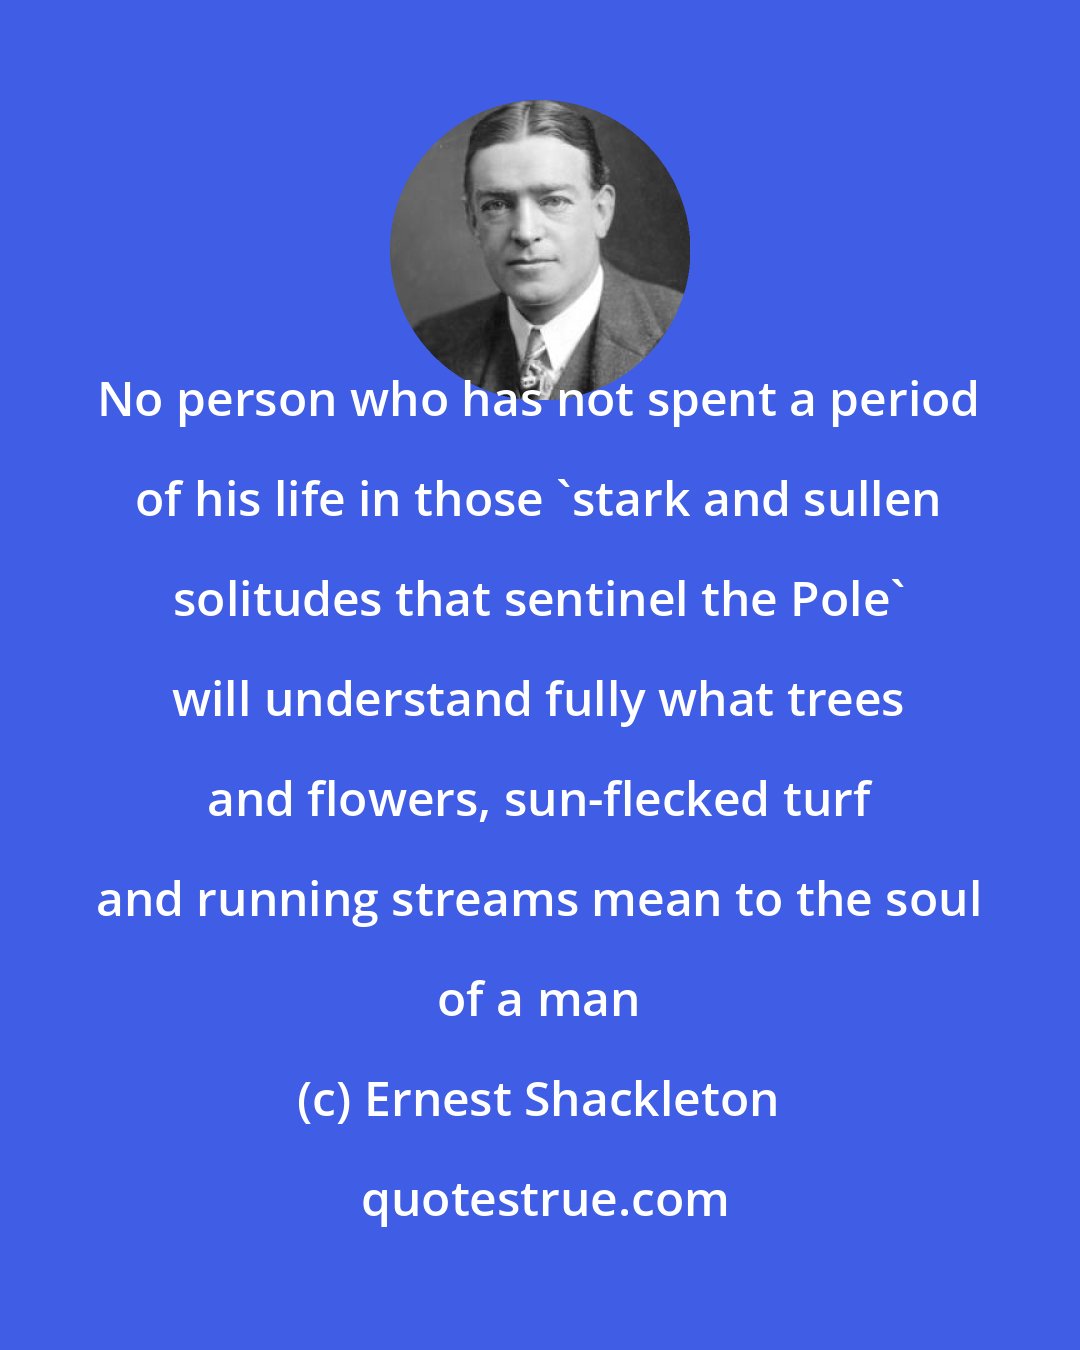 Ernest Shackleton: No person who has not spent a period of his life in those 'stark and sullen solitudes that sentinel the Pole' will understand fully what trees and flowers, sun-flecked turf and running streams mean to the soul of a man